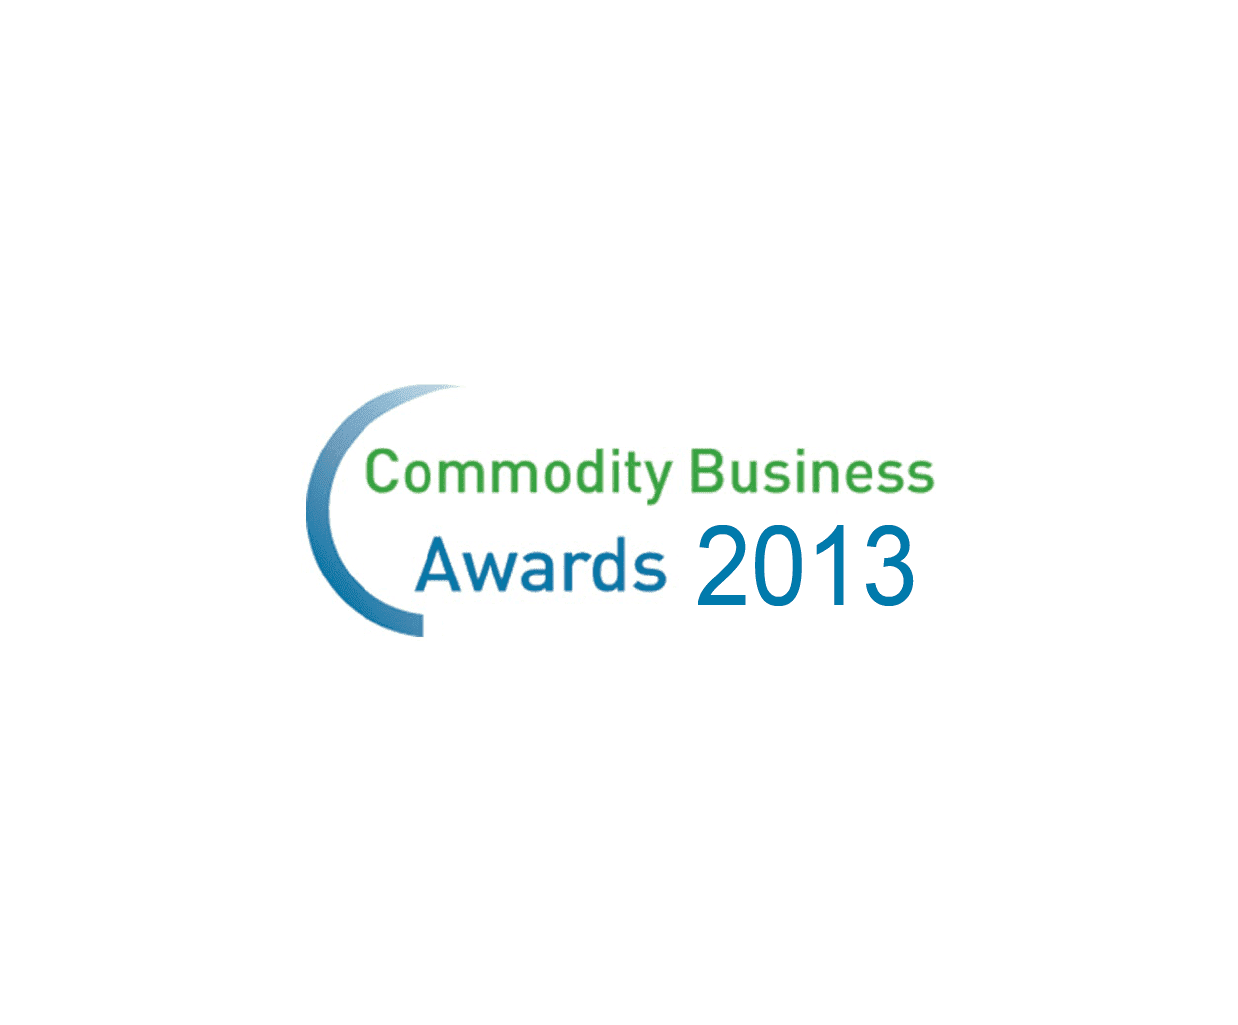 Commodity business 2013